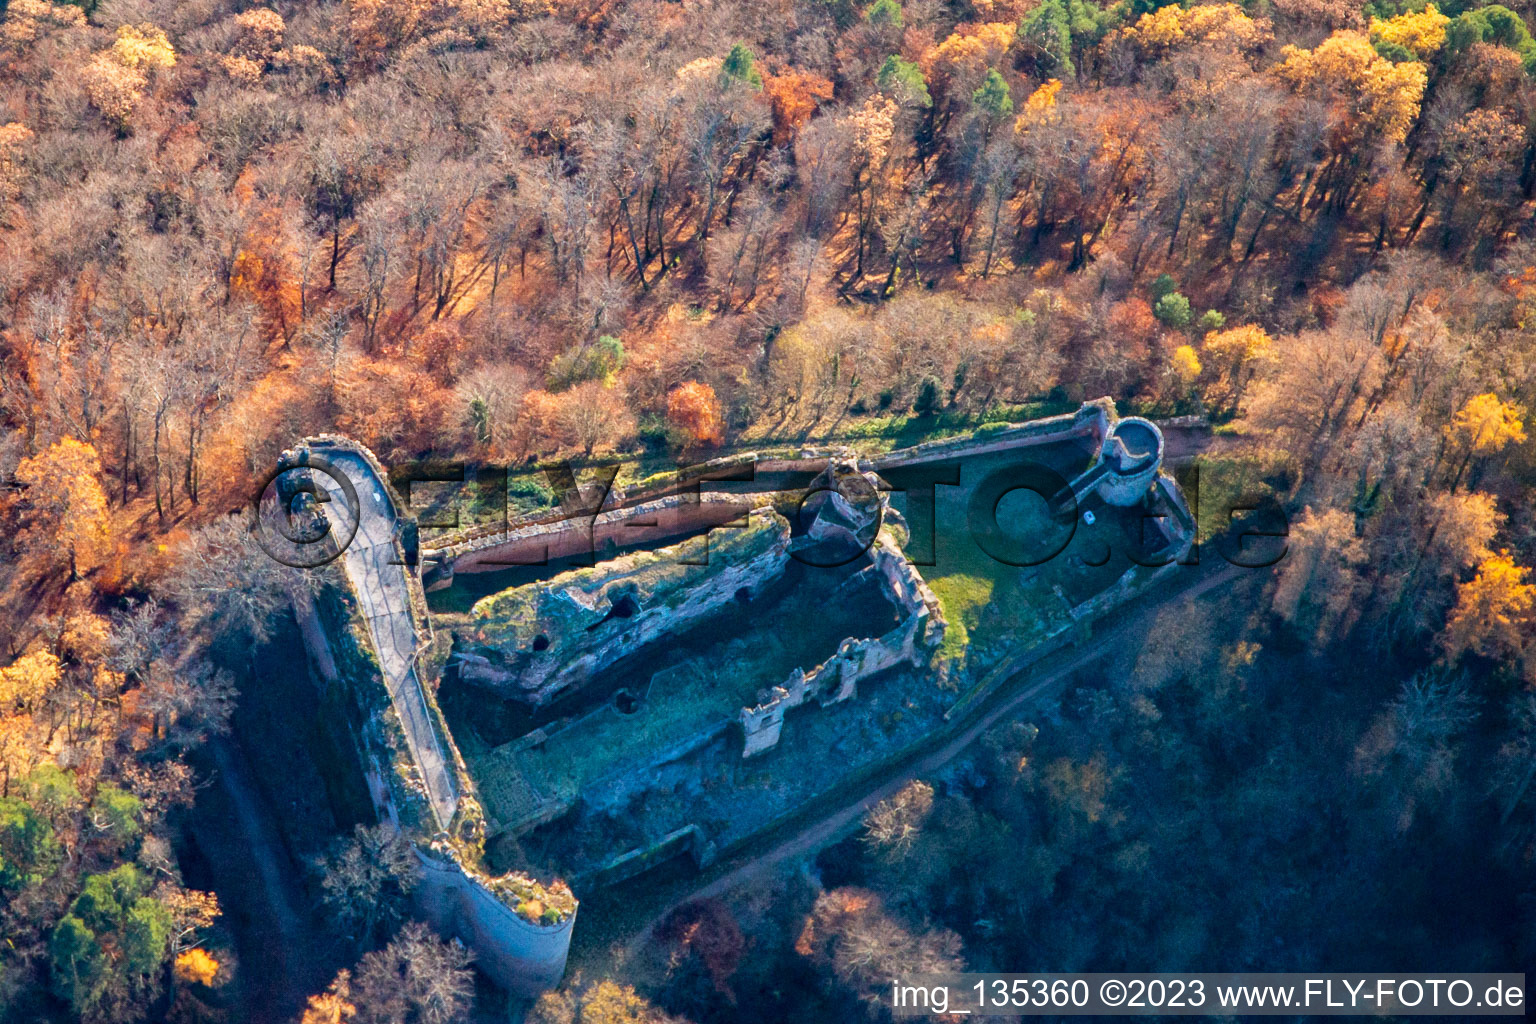 Neuscharfeneck castle ruins in Flemlingen in the state Rhineland-Palatinate, Germany seen from above